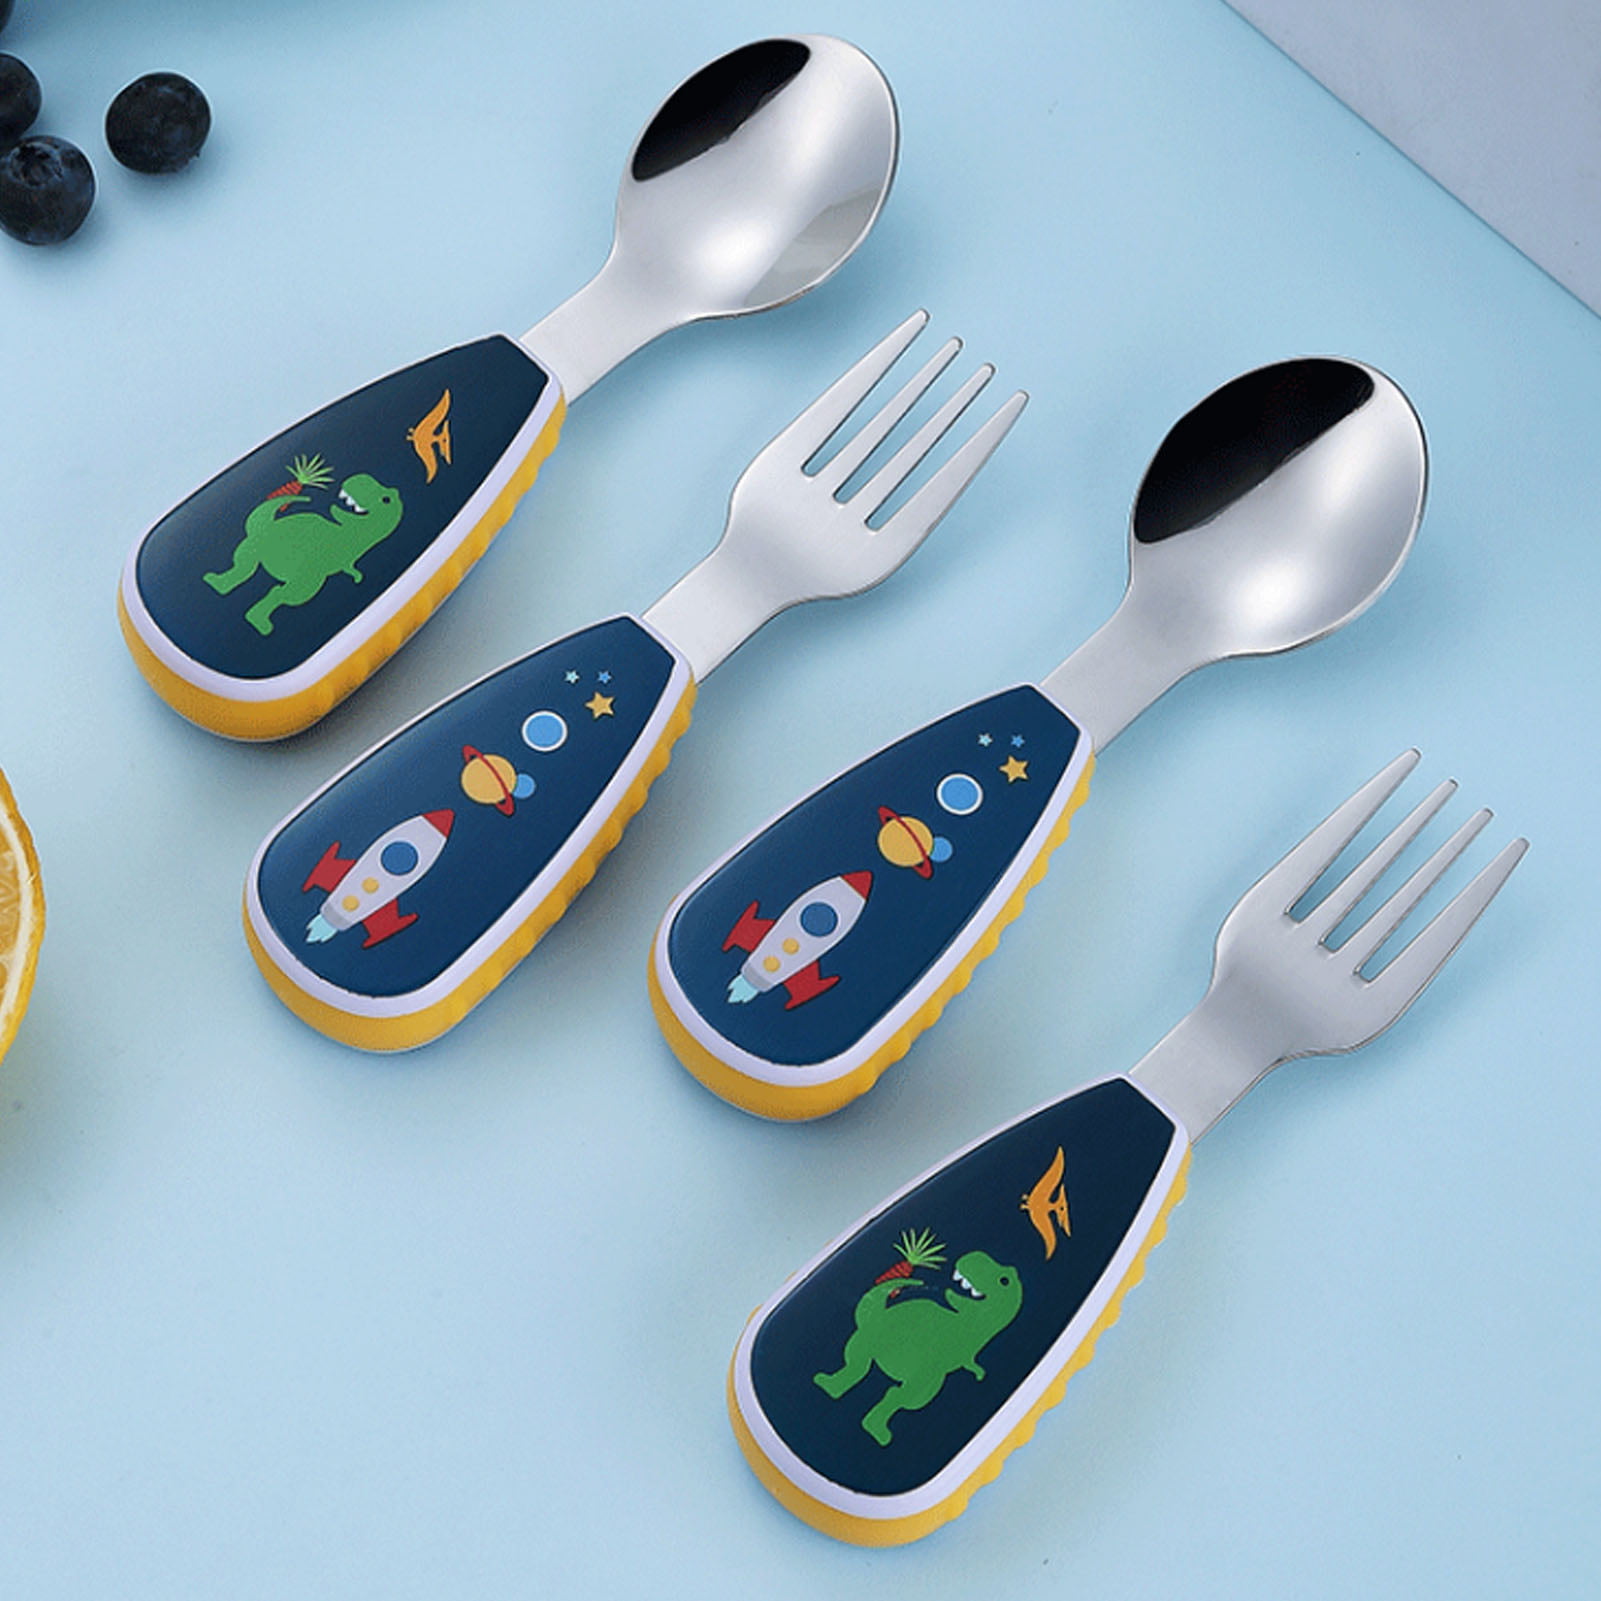 Easy to Grip Childrens 3-Piece Cutlery Set 